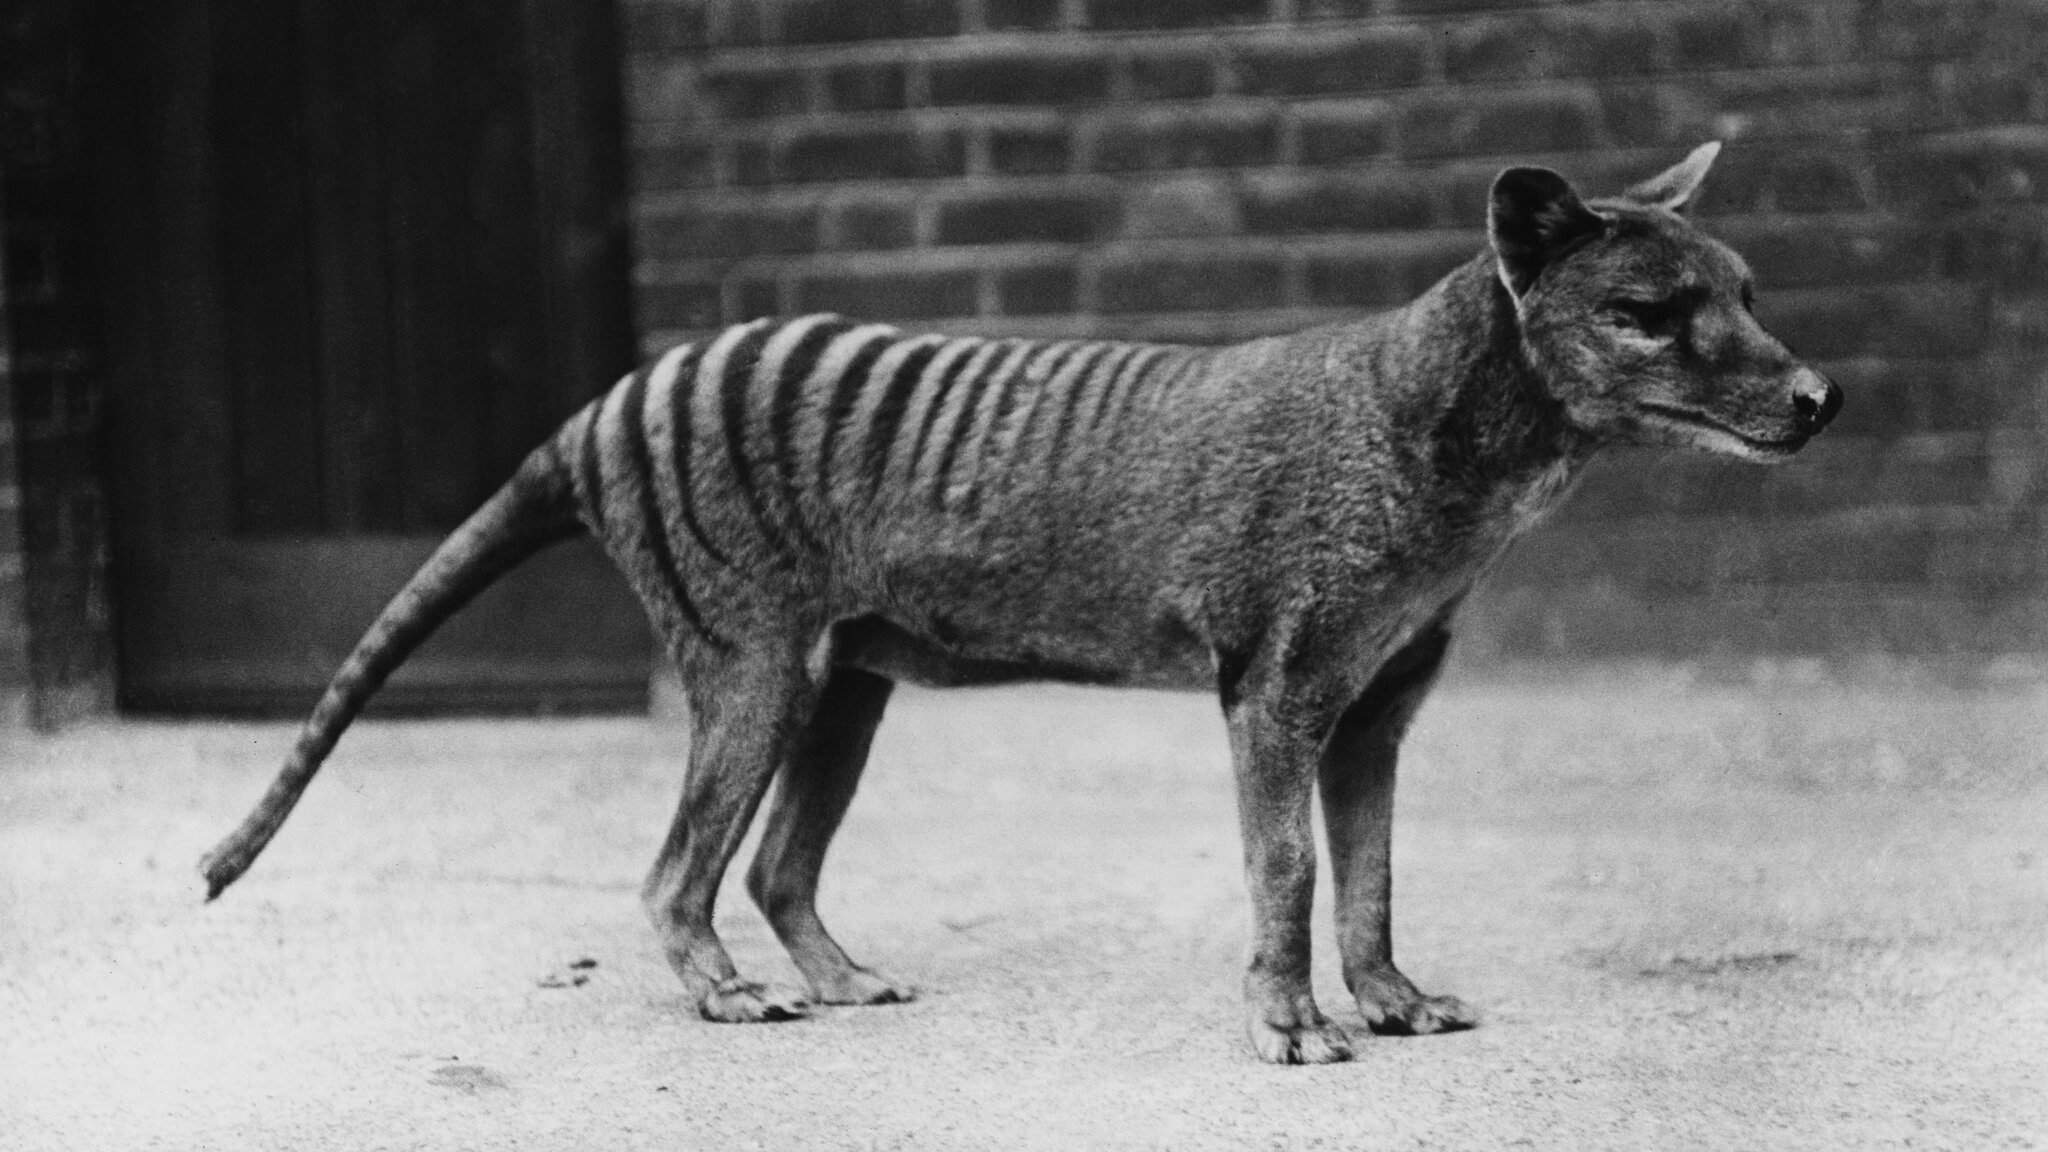 A thylacine in captivity in the early 20th century. Credit: Popperfoto via Getty Images...